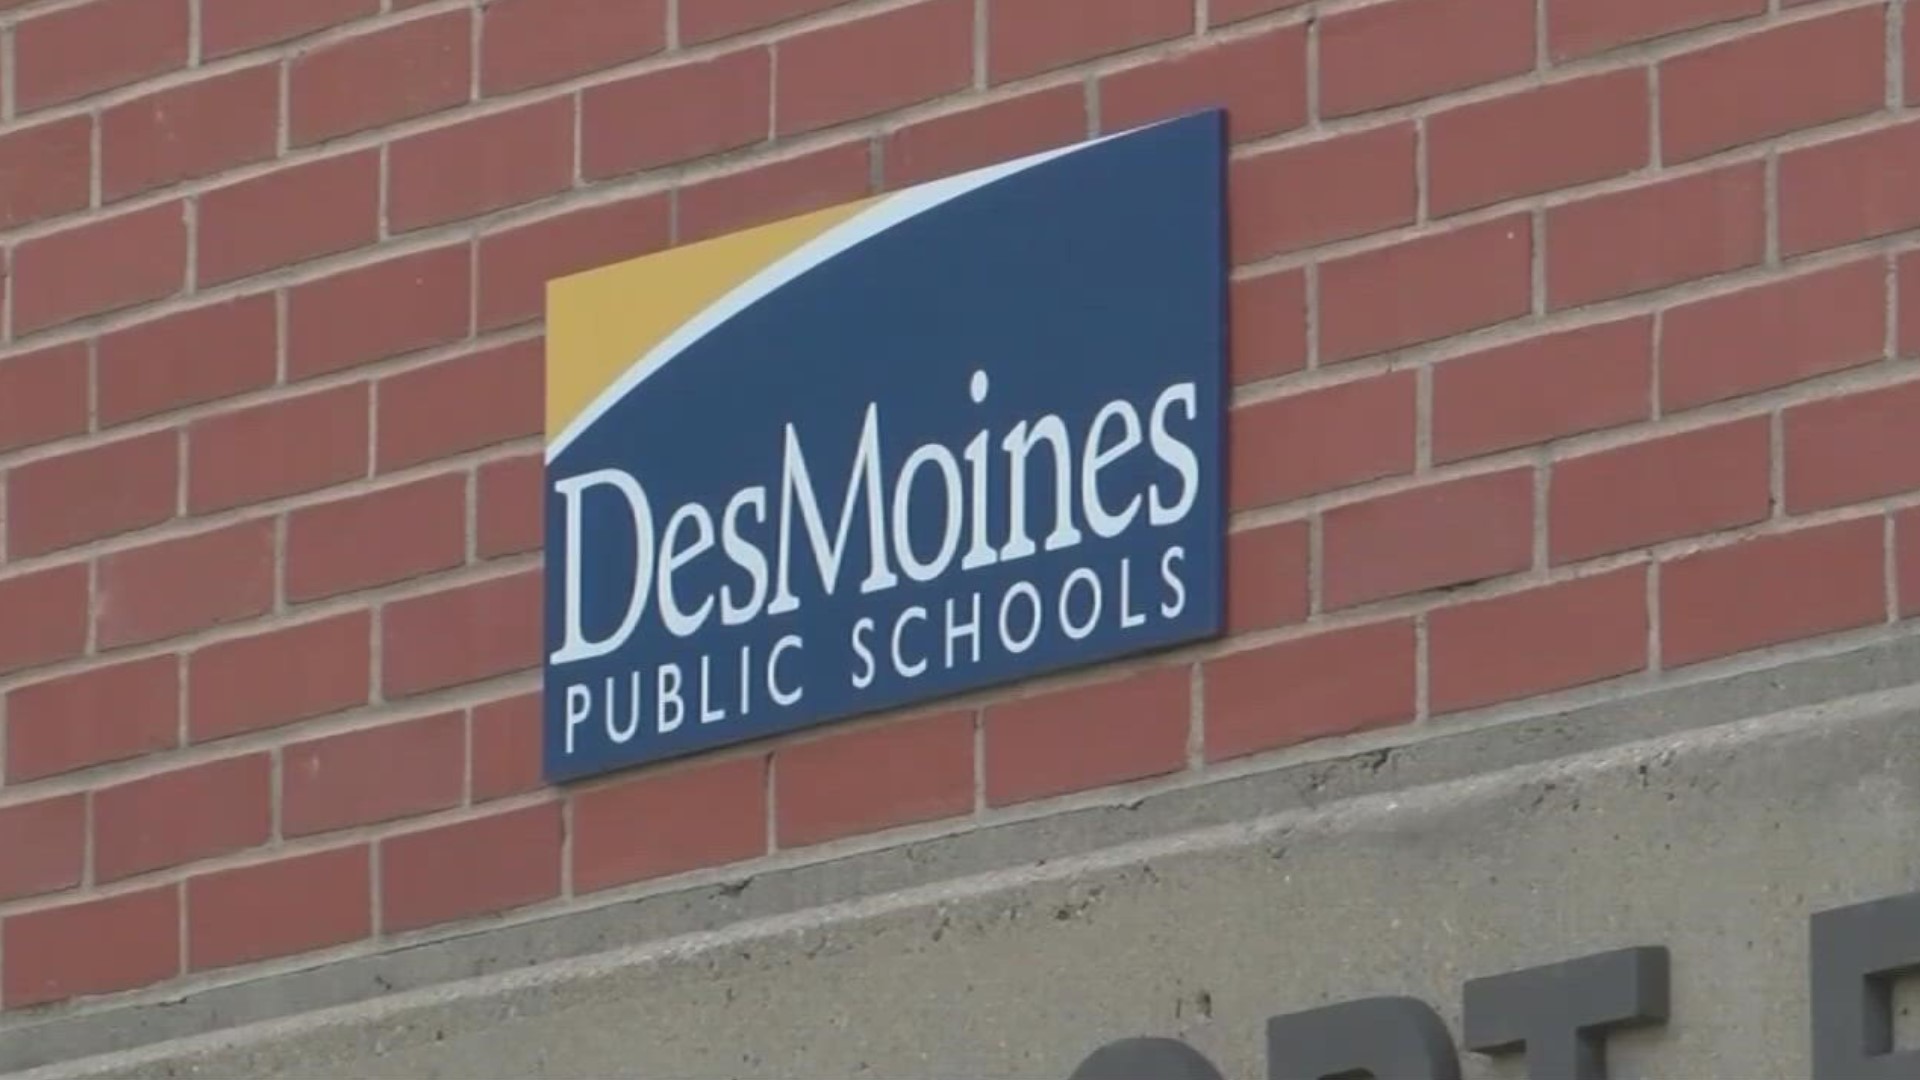 There is "no evidence of a bona fide danger to staff or students" at DMPS schools, according to Des Moines police.